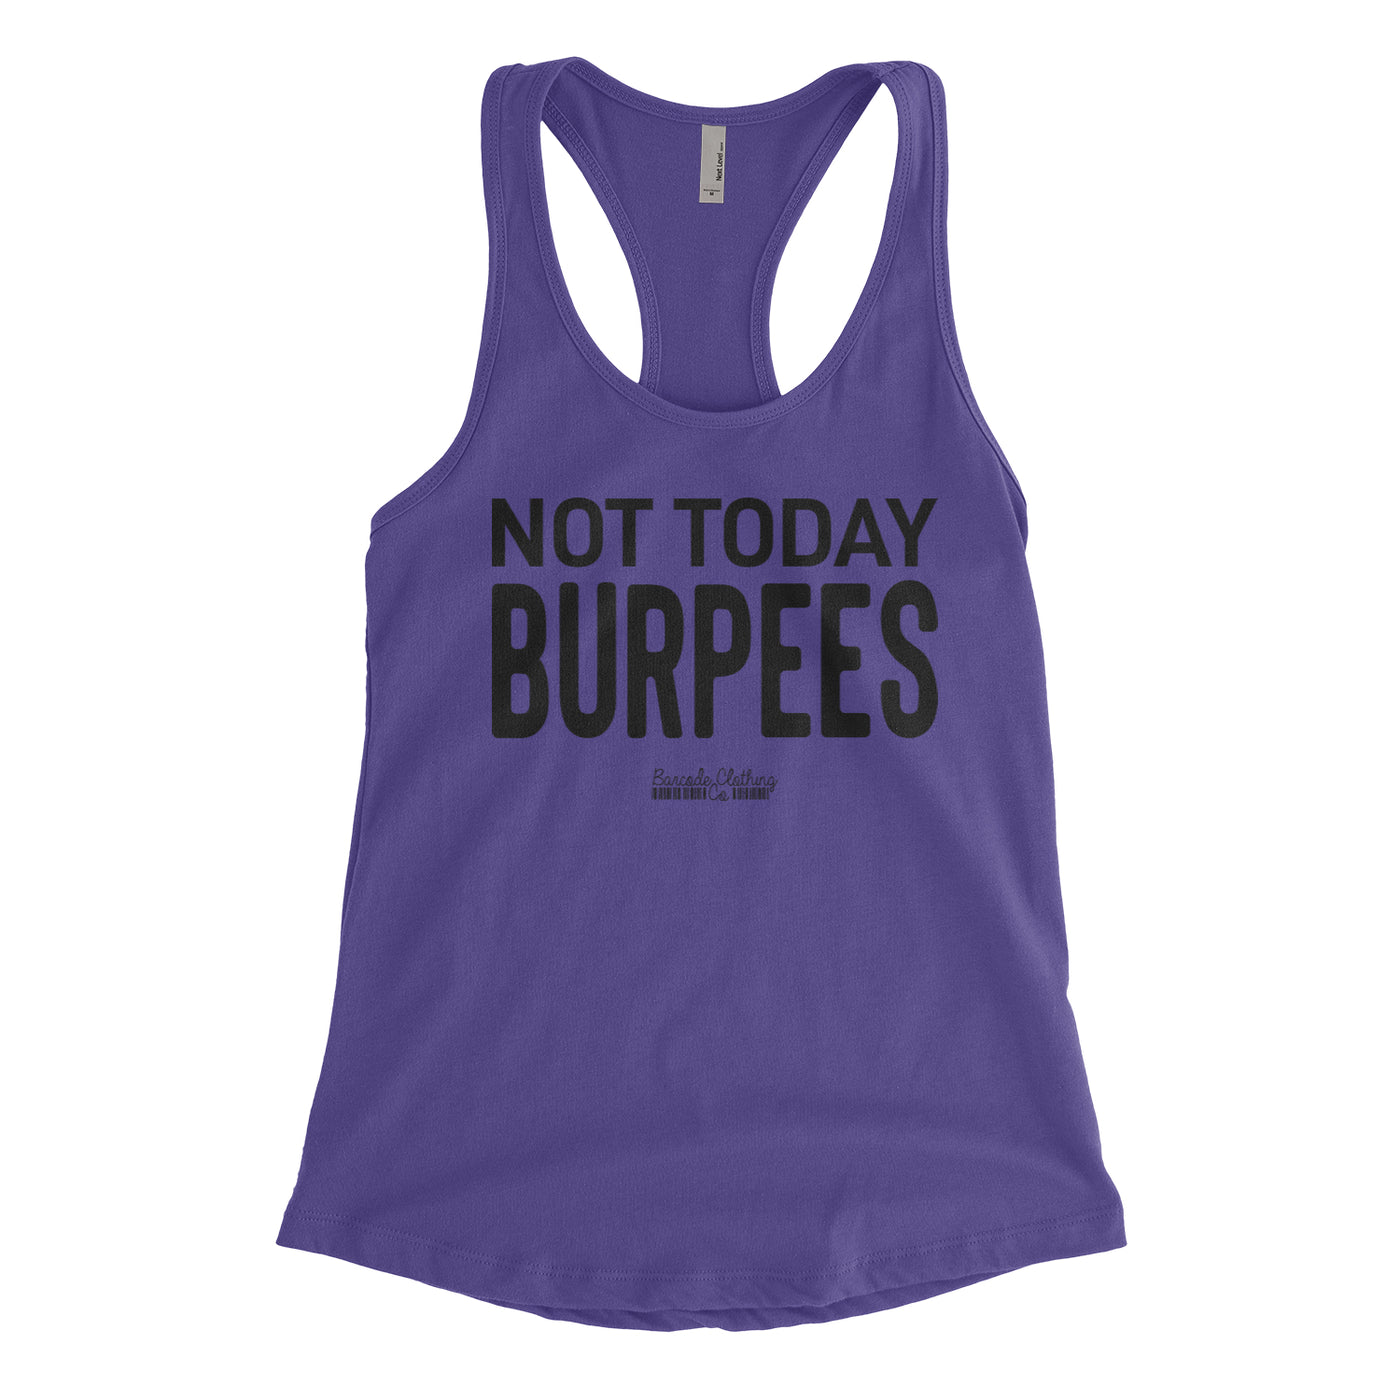 Not Today Burpees Blacked Out